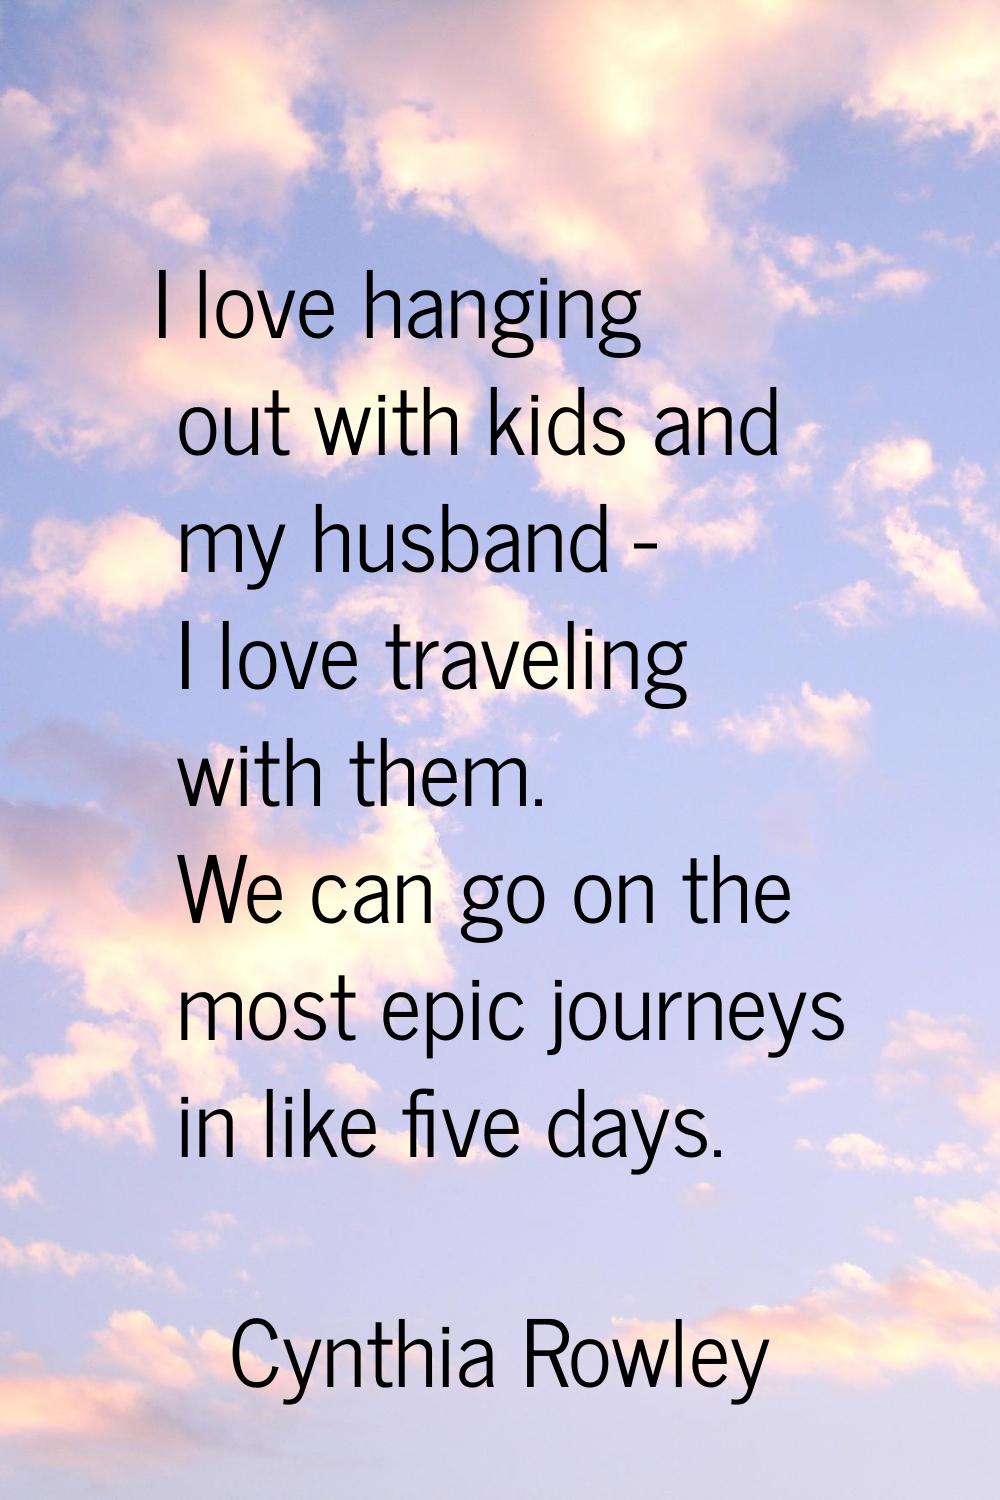 I love hanging out with kids and my husband - I love traveling with them. We can go on the most epi